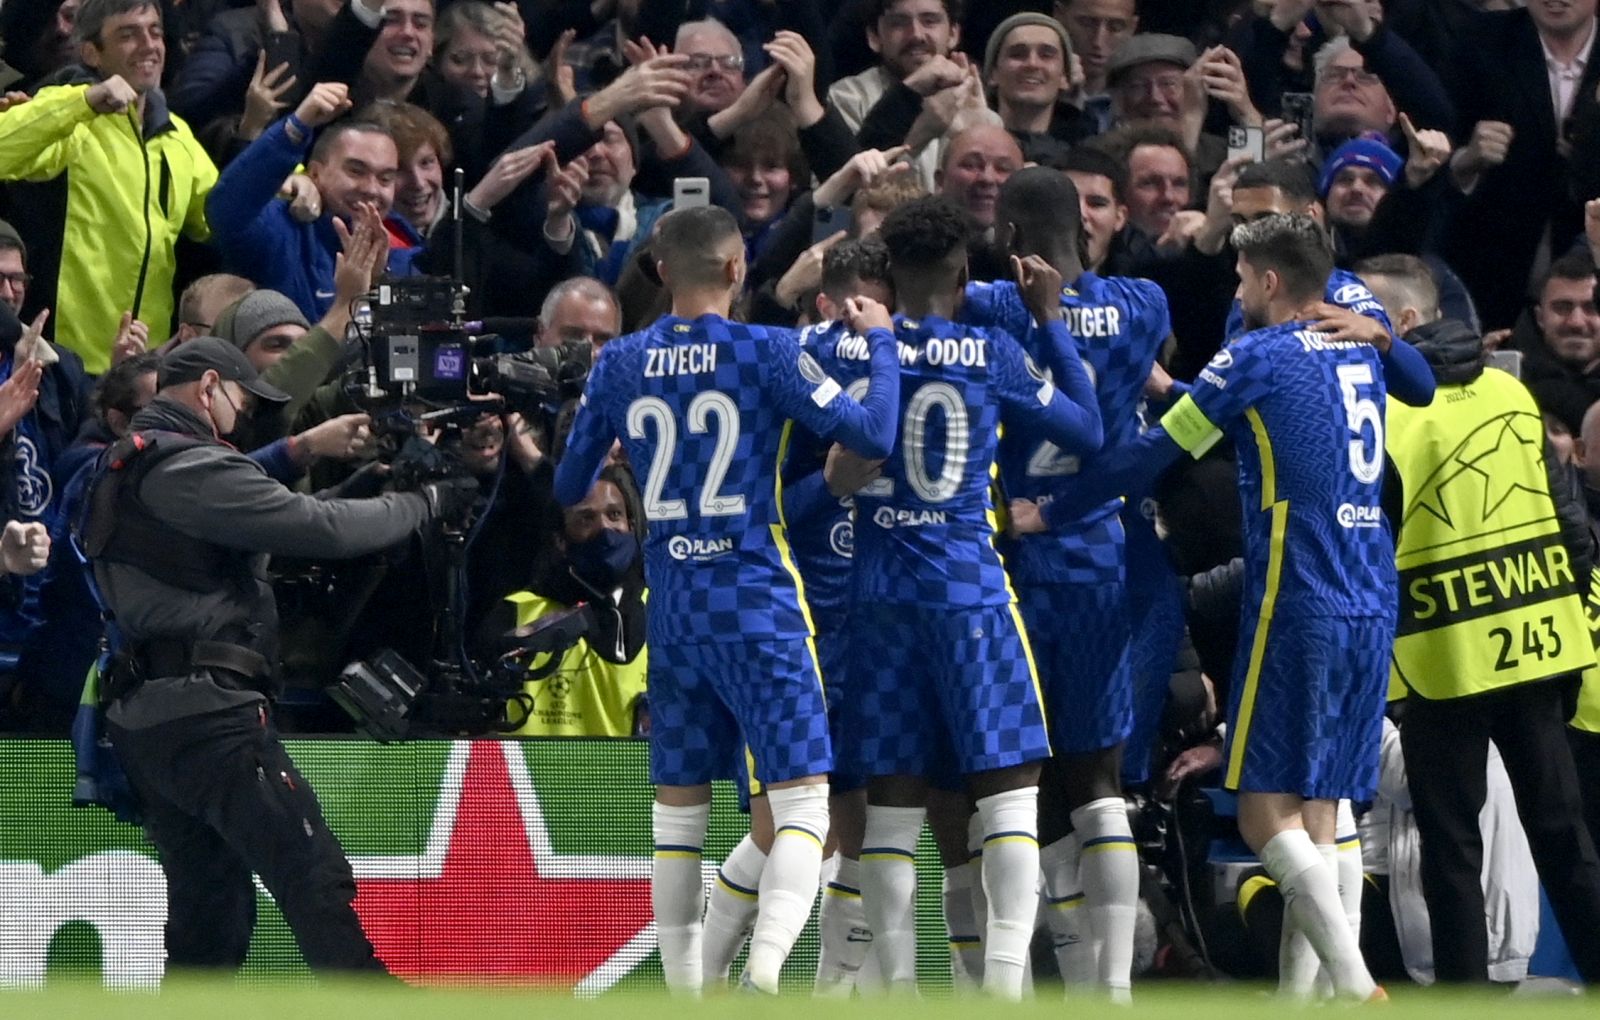 epa09599786 Players of Chelsea celebrate after scoring a goal during the UEFA Champions League group H soccer match between Chelsea FC and Juventus FC in London, Britain, 23 November 2021.  EPA/Facundo Arrizabalaga